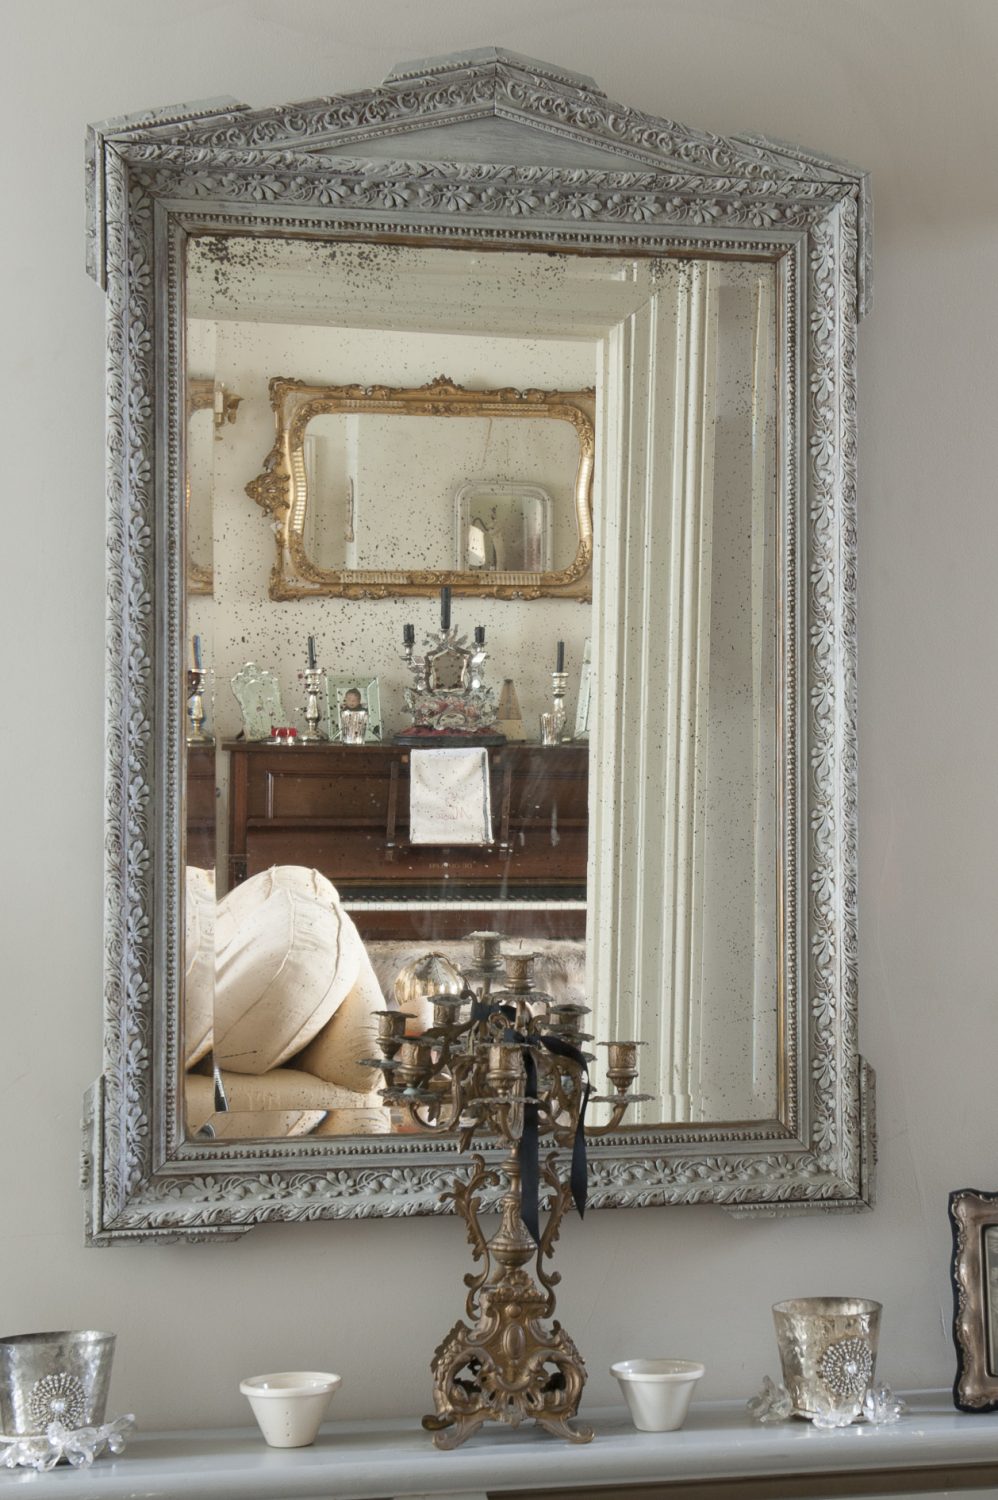 Antique mirrors are a prominent feature of Minnie’s home